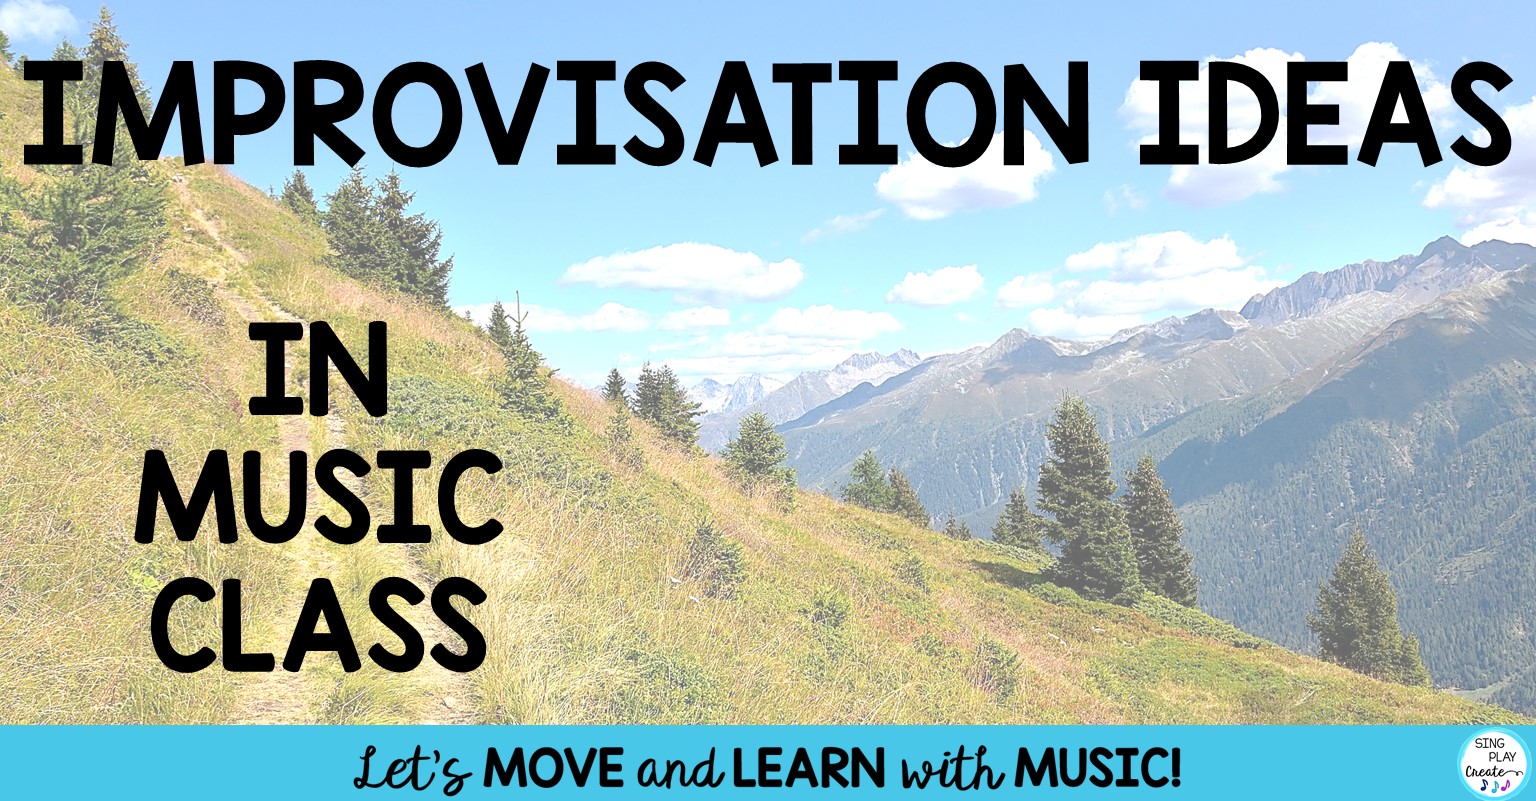 You are currently viewing Ideas to Implement Improvisation in Music Class